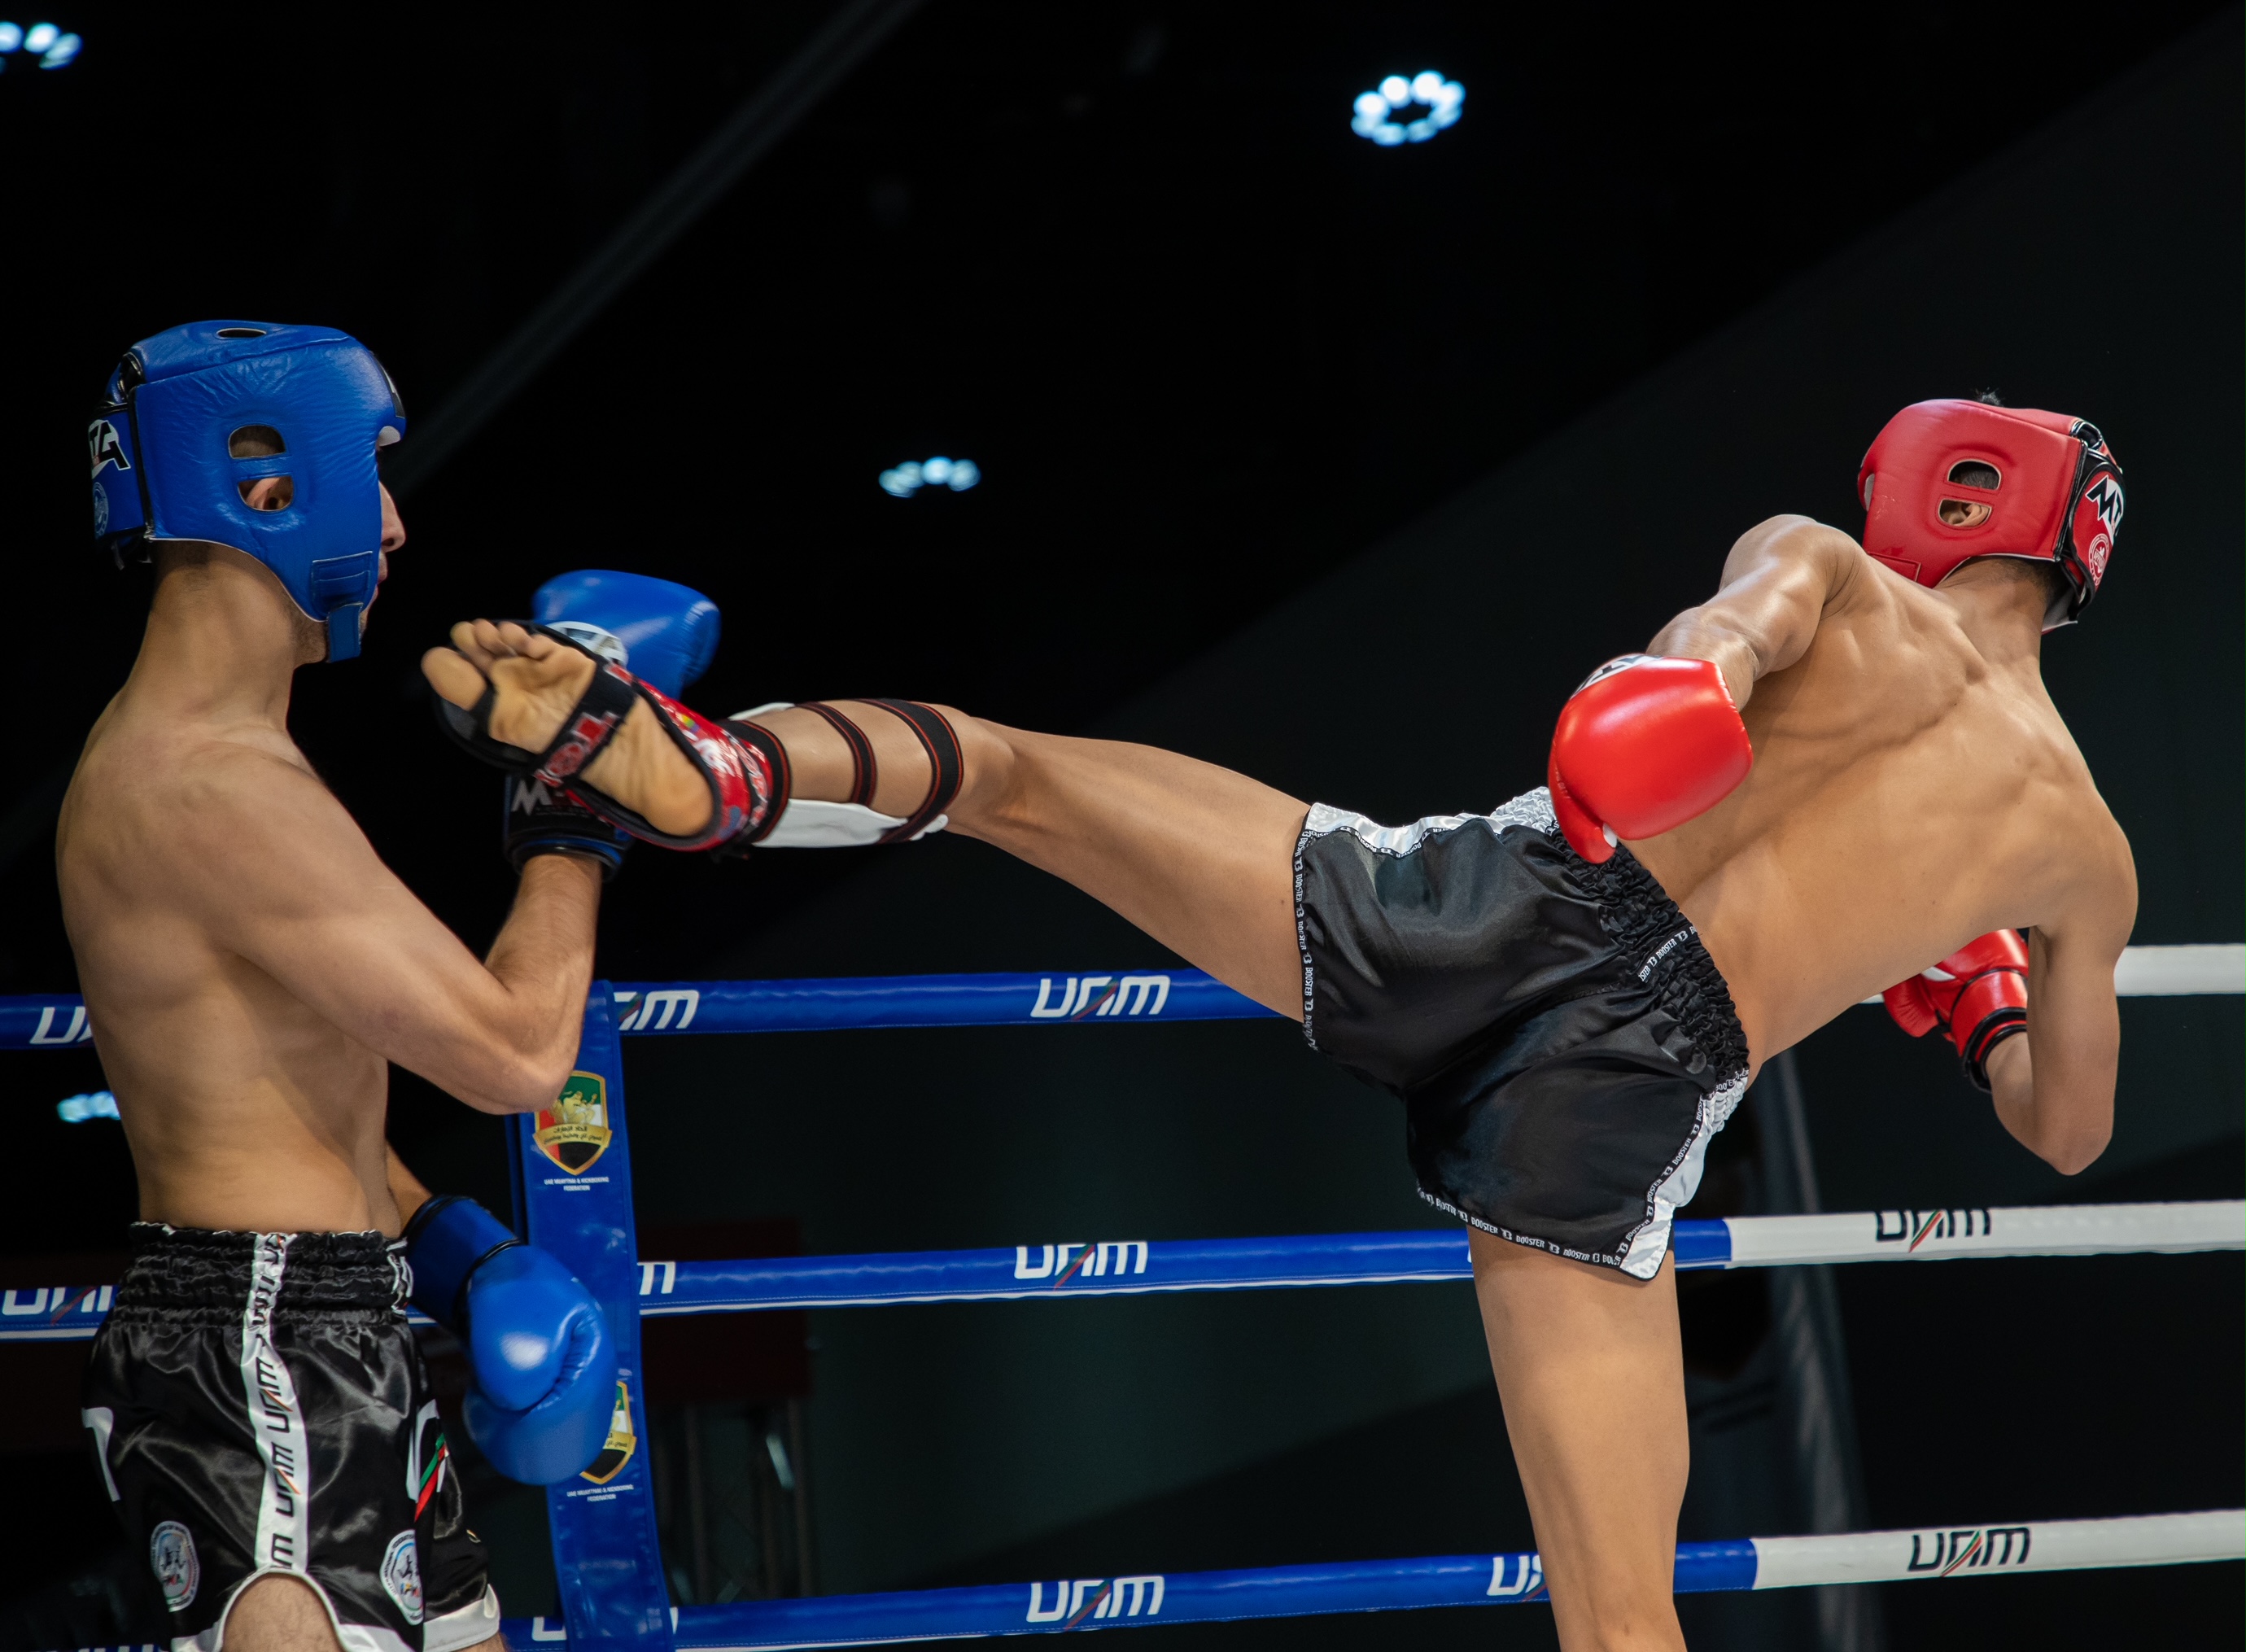 UAE Muay Thai Championship in Abu Dhabi with the participation of 150 fighters